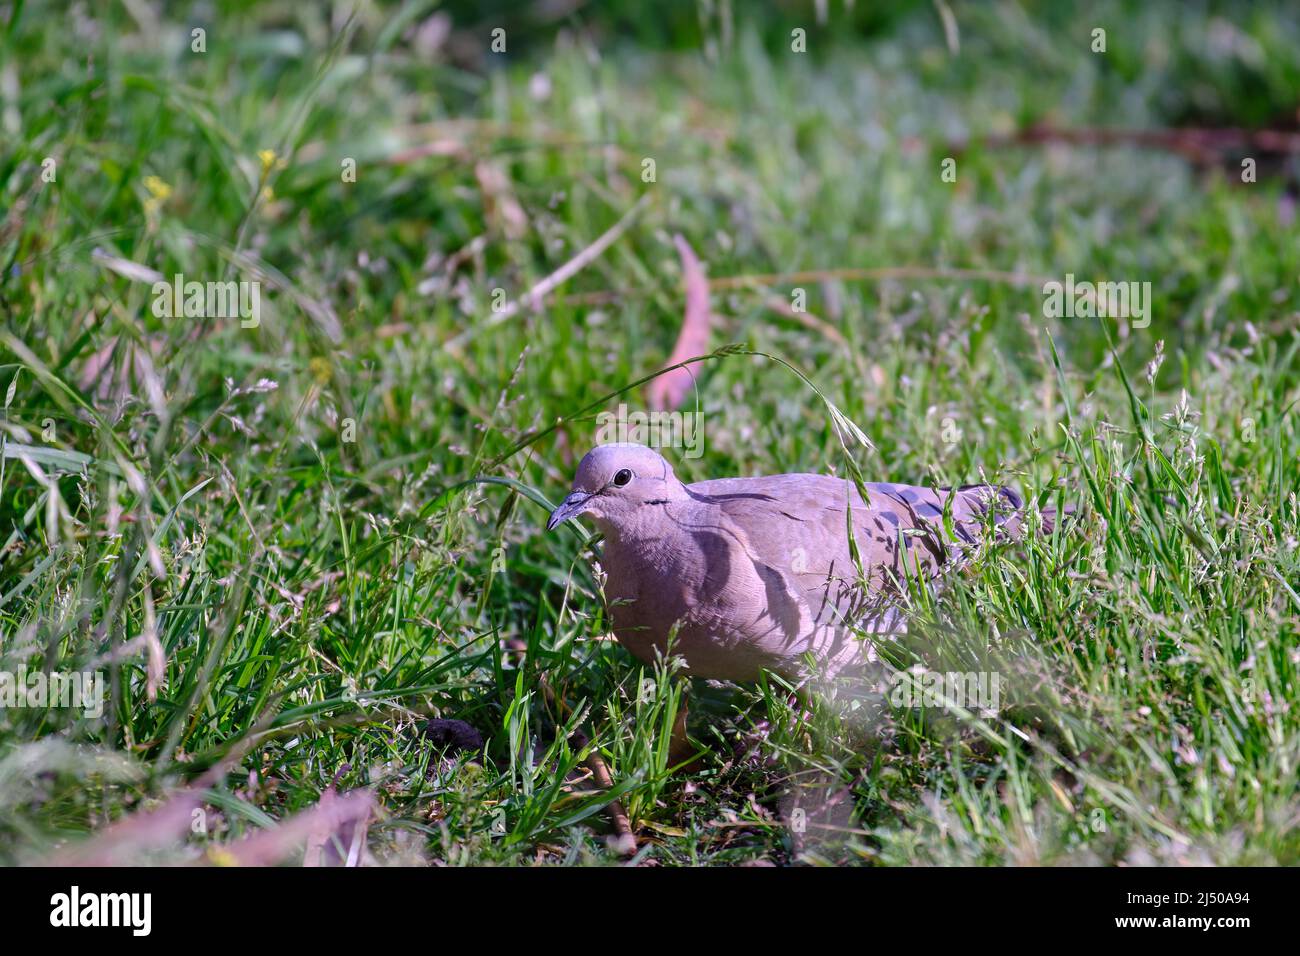 Eared Dove (Zenaida auriculata), walking on the grass looking for its food. Stock Photo